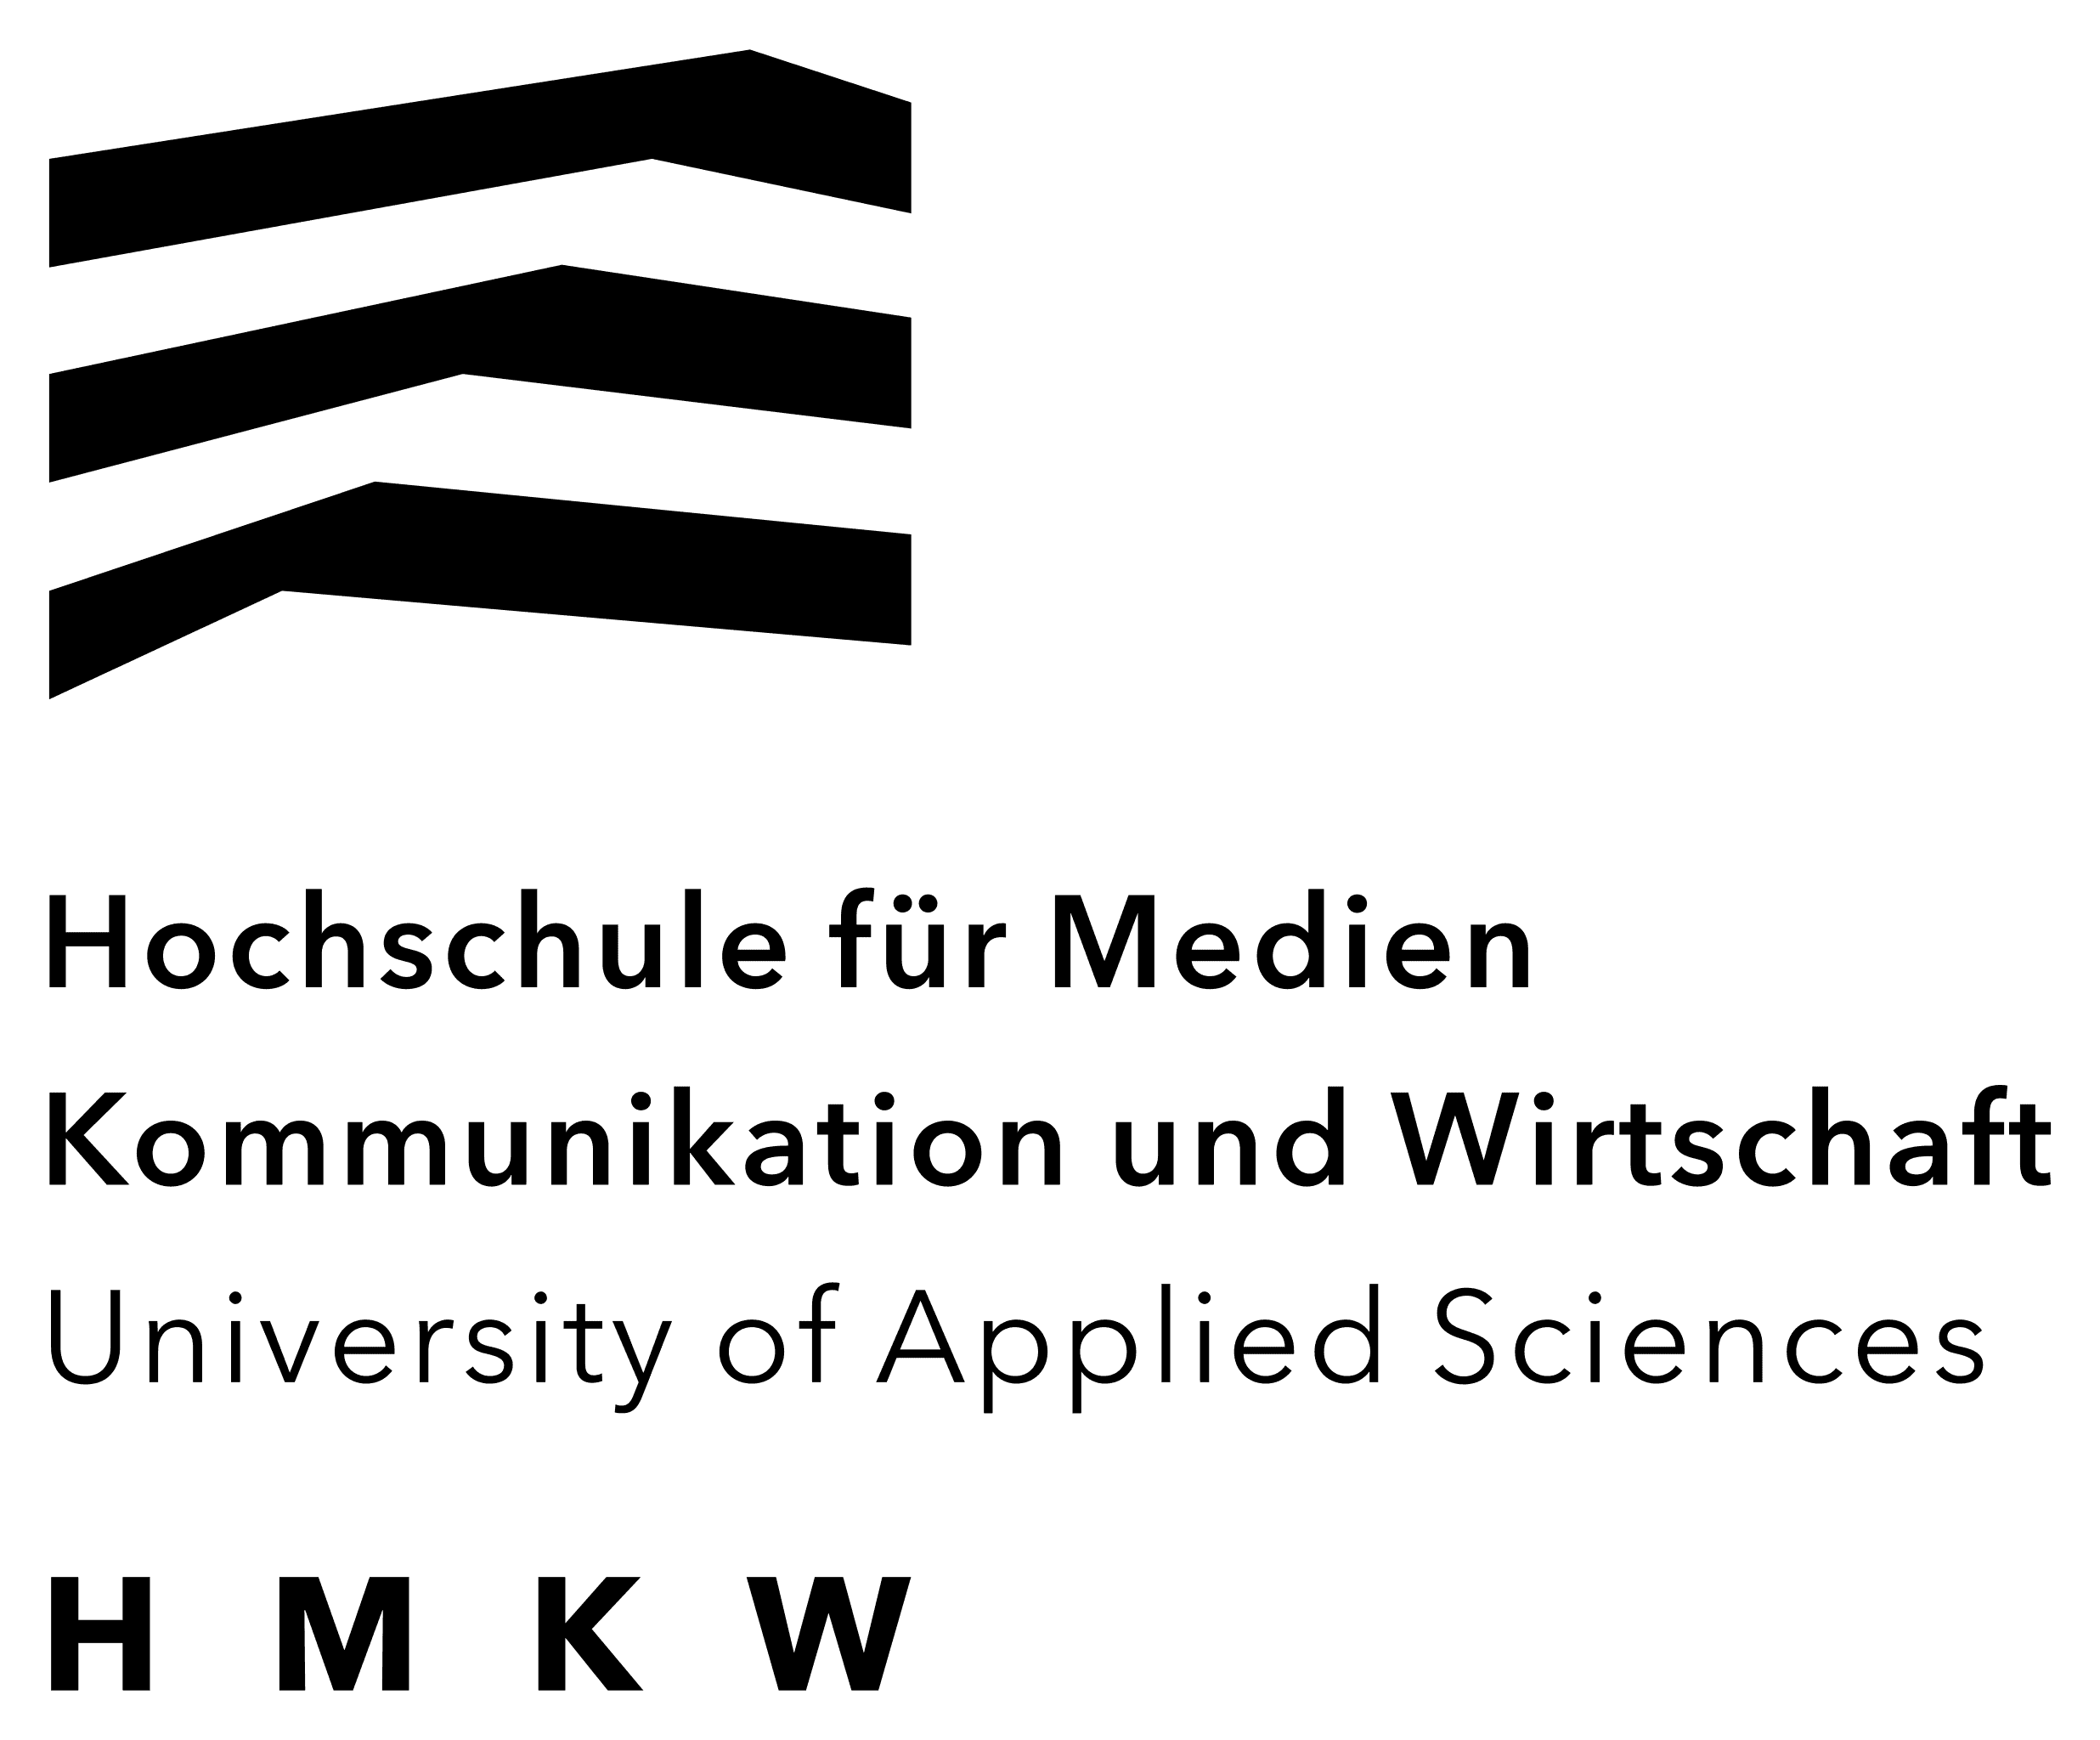 hmkw-university-of-applied-sciences-for-media-communication-and-management-e657aa1ea1-cover-picture